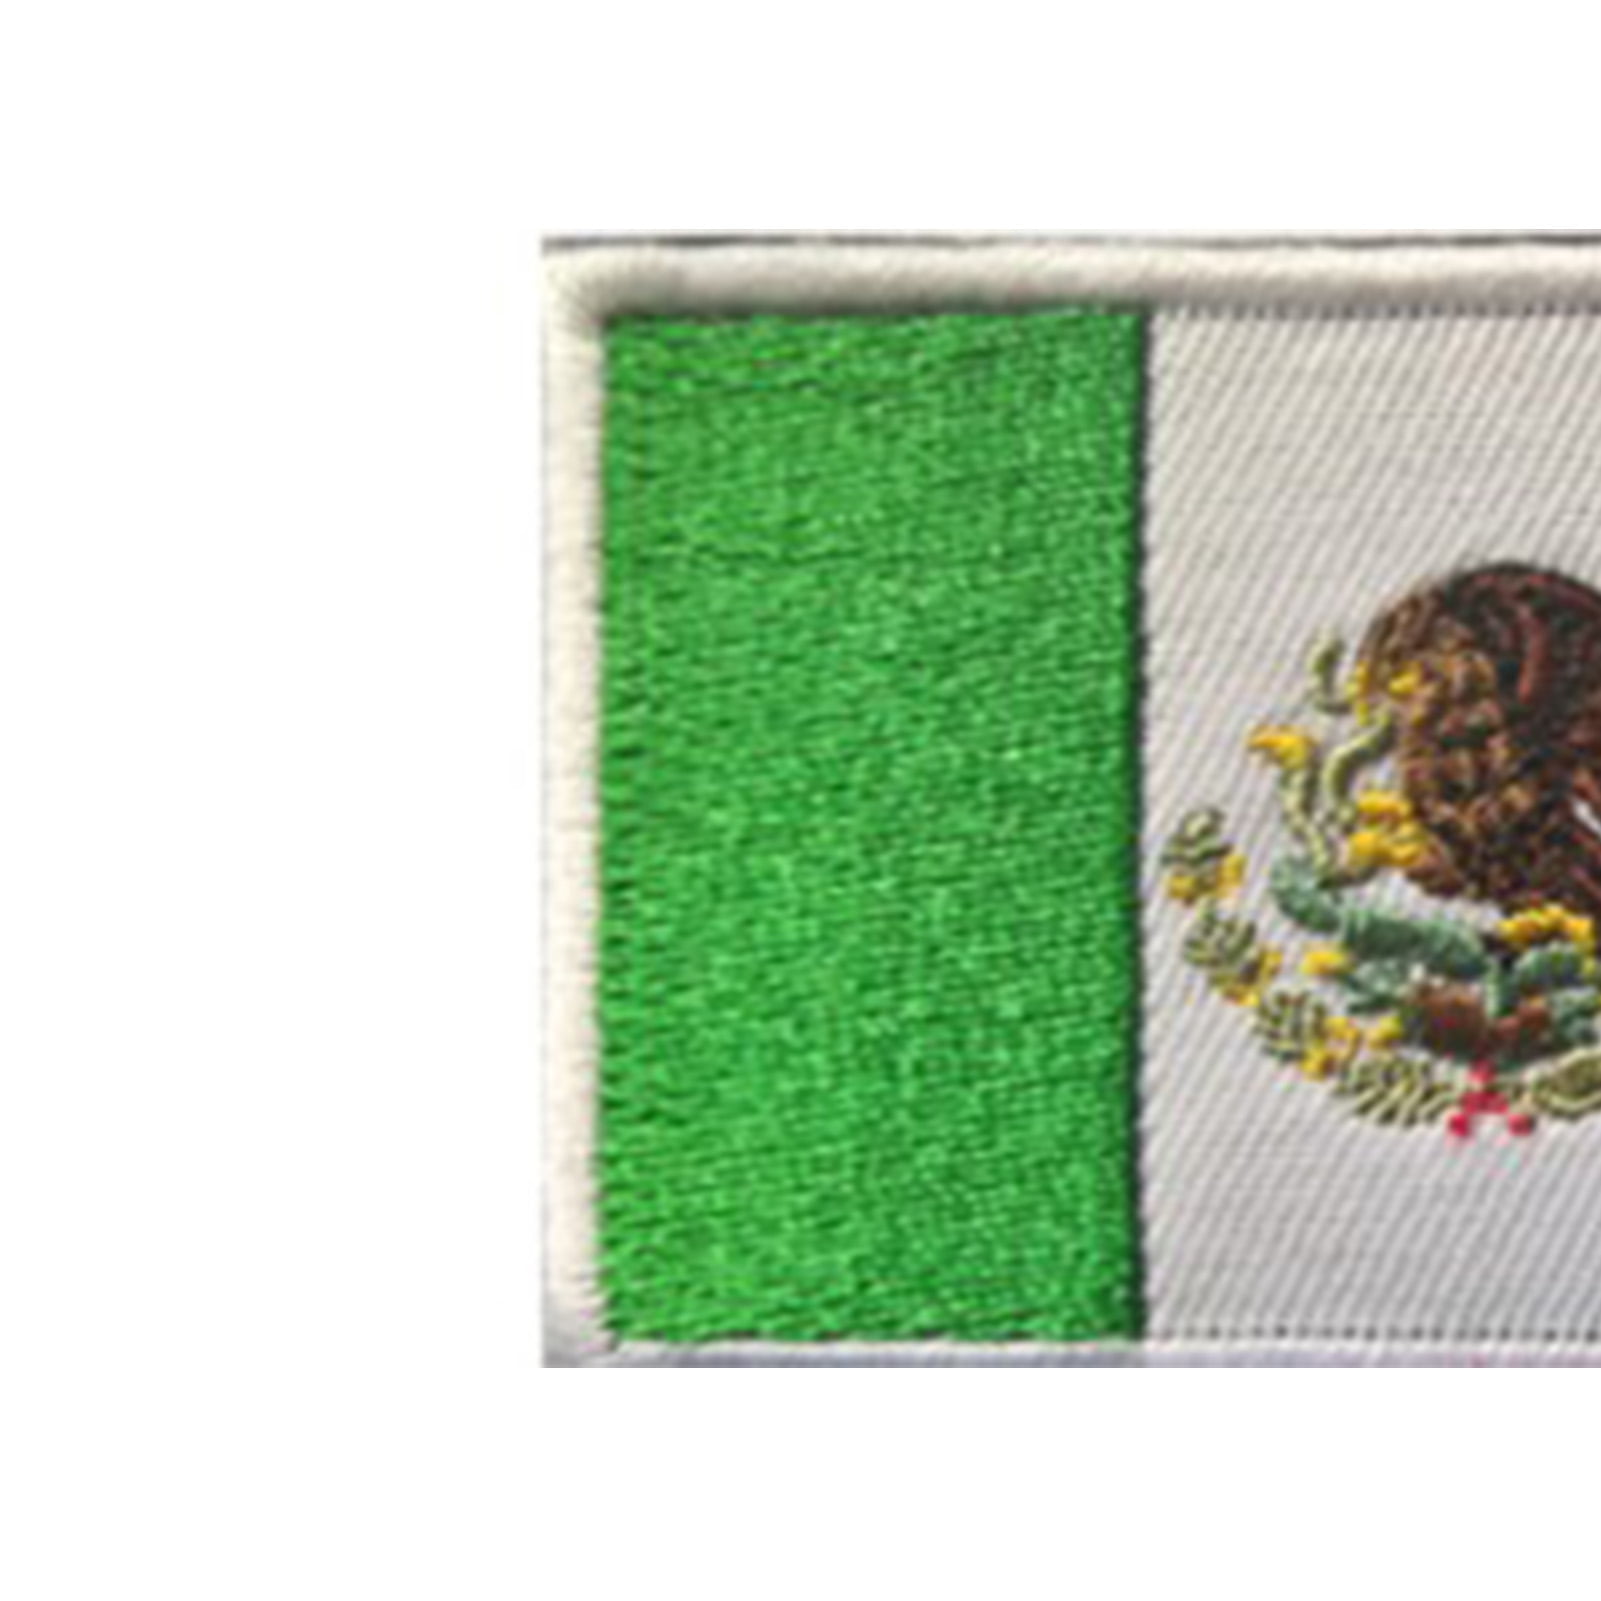 Mexico Flag Patch, Exquisite Mexico Flag Iron On Patches For Clothes 